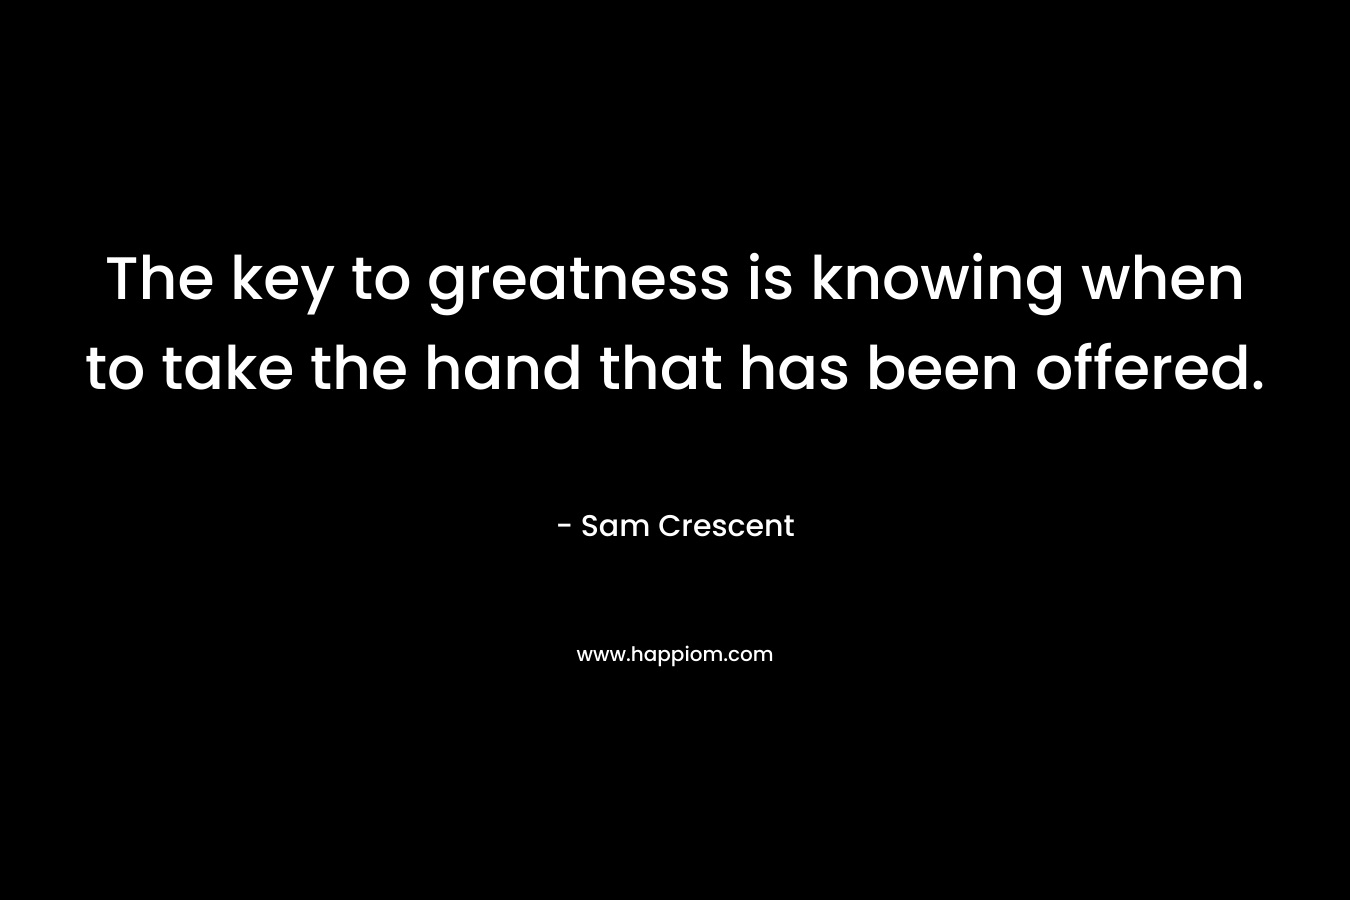 The key to greatness is knowing when to take the hand that has been offered. – Sam Crescent